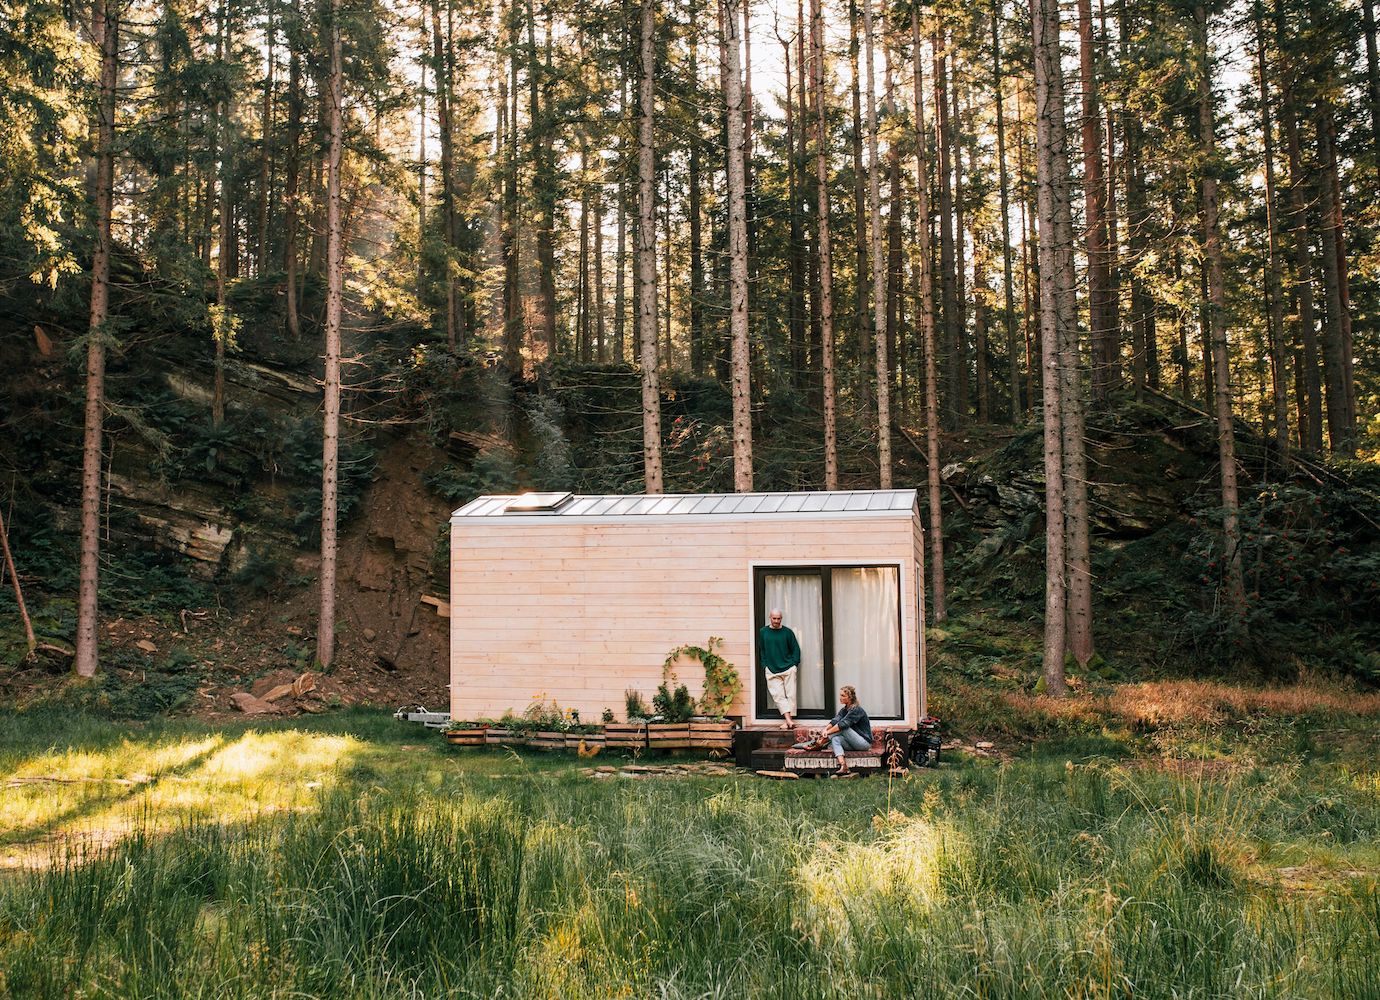 Dacha on wheels: the wooden summer home that travels with you